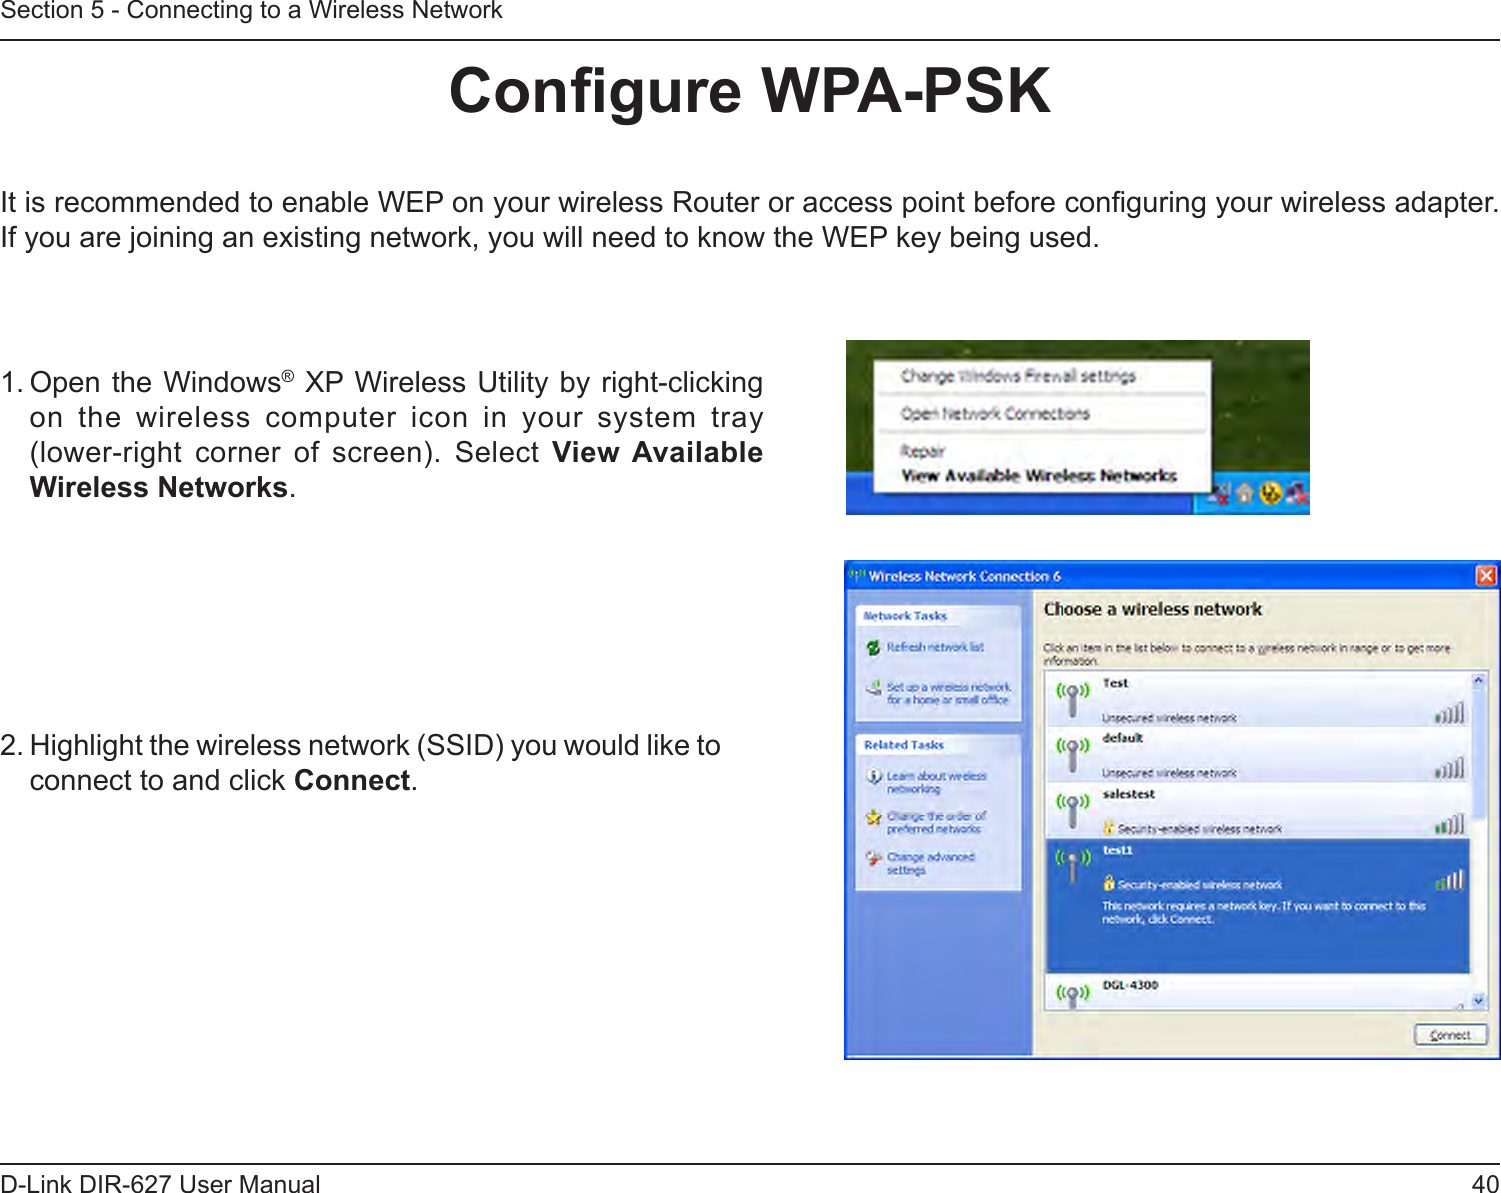 40D-Link DIR-627 User ManualSection 5 - Connecting to a Wireless NetworkCongureWPA-PSKIt is recommended to enable WEP on your wireless Router or access point before conguring your wireless adapter. If you are joining an existing network, you will need to know the WEP key being used.2. Highlight the wireless network (SSID) you would like to connect to and click Connect.1. Open the Windows® XP Wireless Utility by right-clicking on  the  wireless  computer  icon  in  your  system  tray  (lower-right  corner  of  screen).  Select  ViewAvailableWirelessNetworks. 